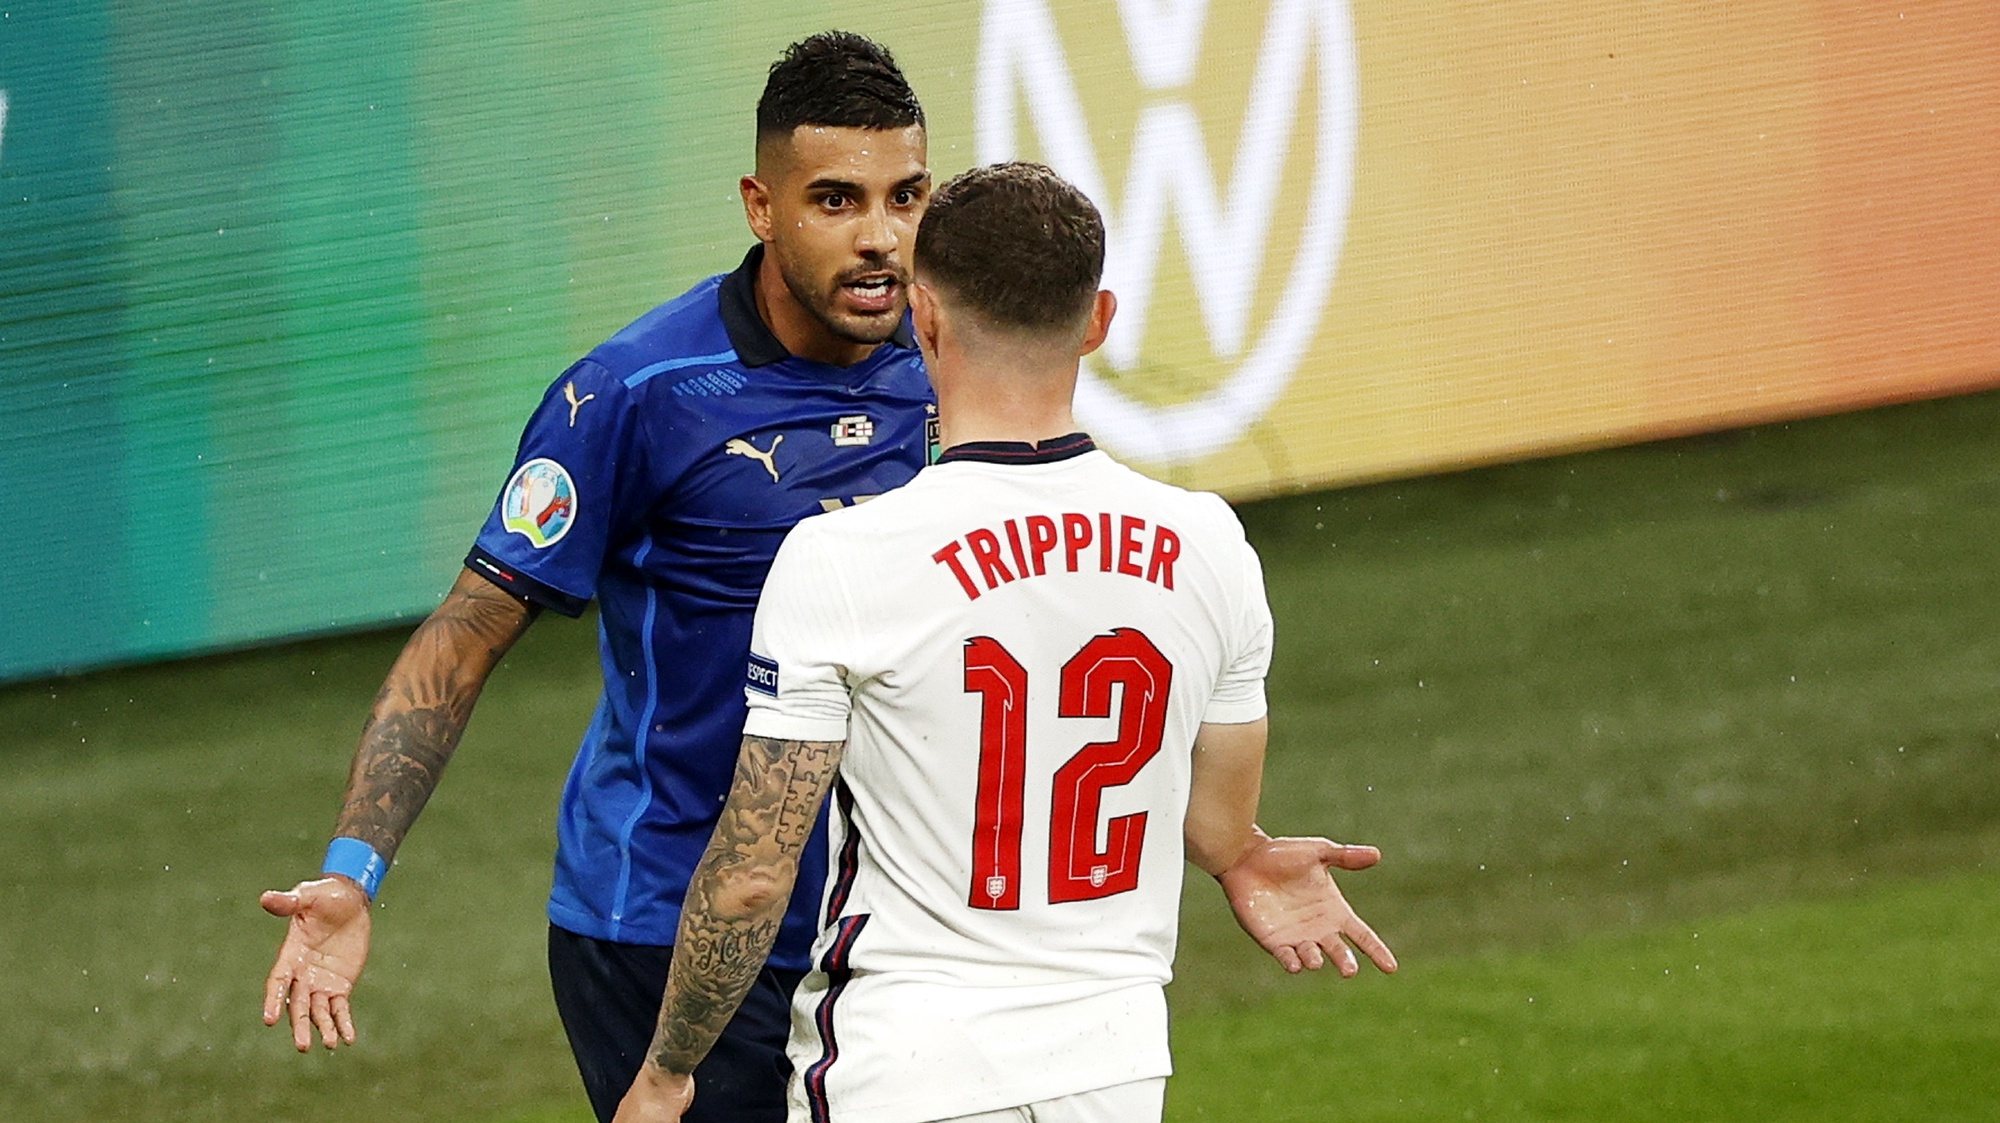 epa09338461 Emerson (L) of Italy talks to Kieran Trippier of England during the UEFA EURO 2020 final between Italy and England in London, Britain, 11 July 2021.  EPA/John Sibley / POOL (RESTRICTIONS: For editorial news reporting purposes only. Images must appear as still images and must not emulate match action video footage. Photographs published in online publications shall have an interval of at least 20 seconds between the posting.)